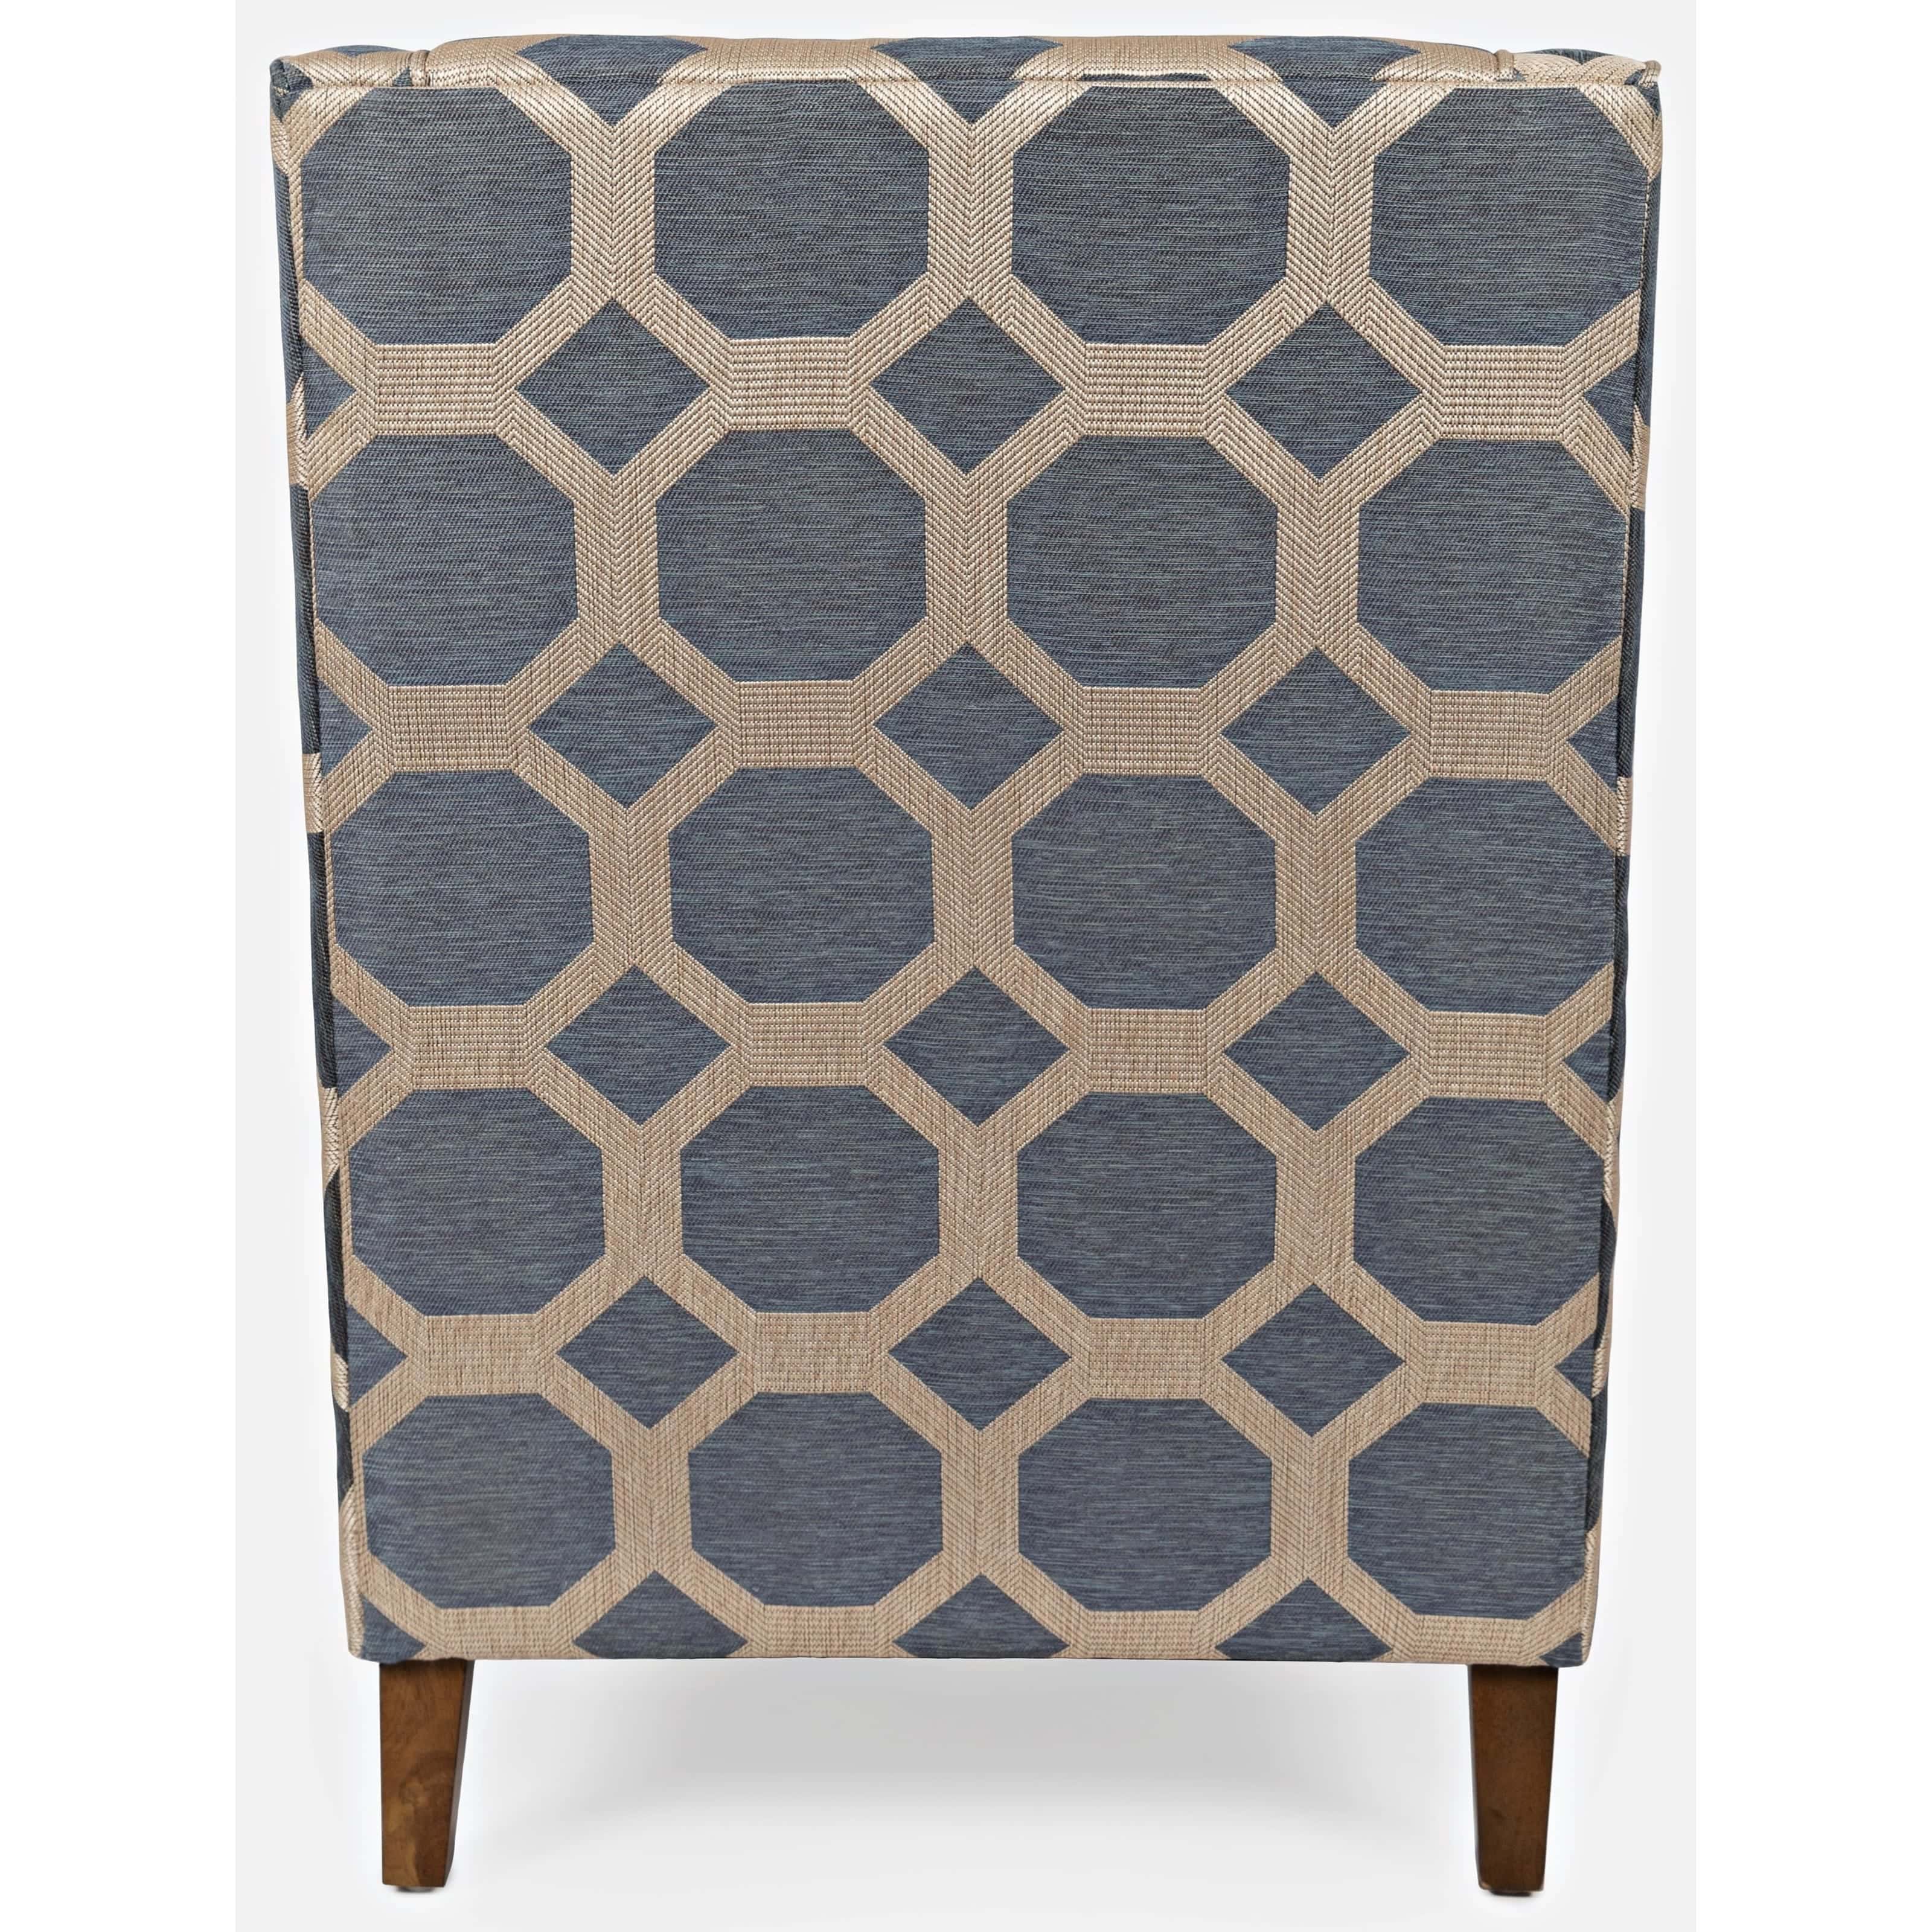 Sanders Grey & Brown Fabric Accent Chair by Jofran Furniture